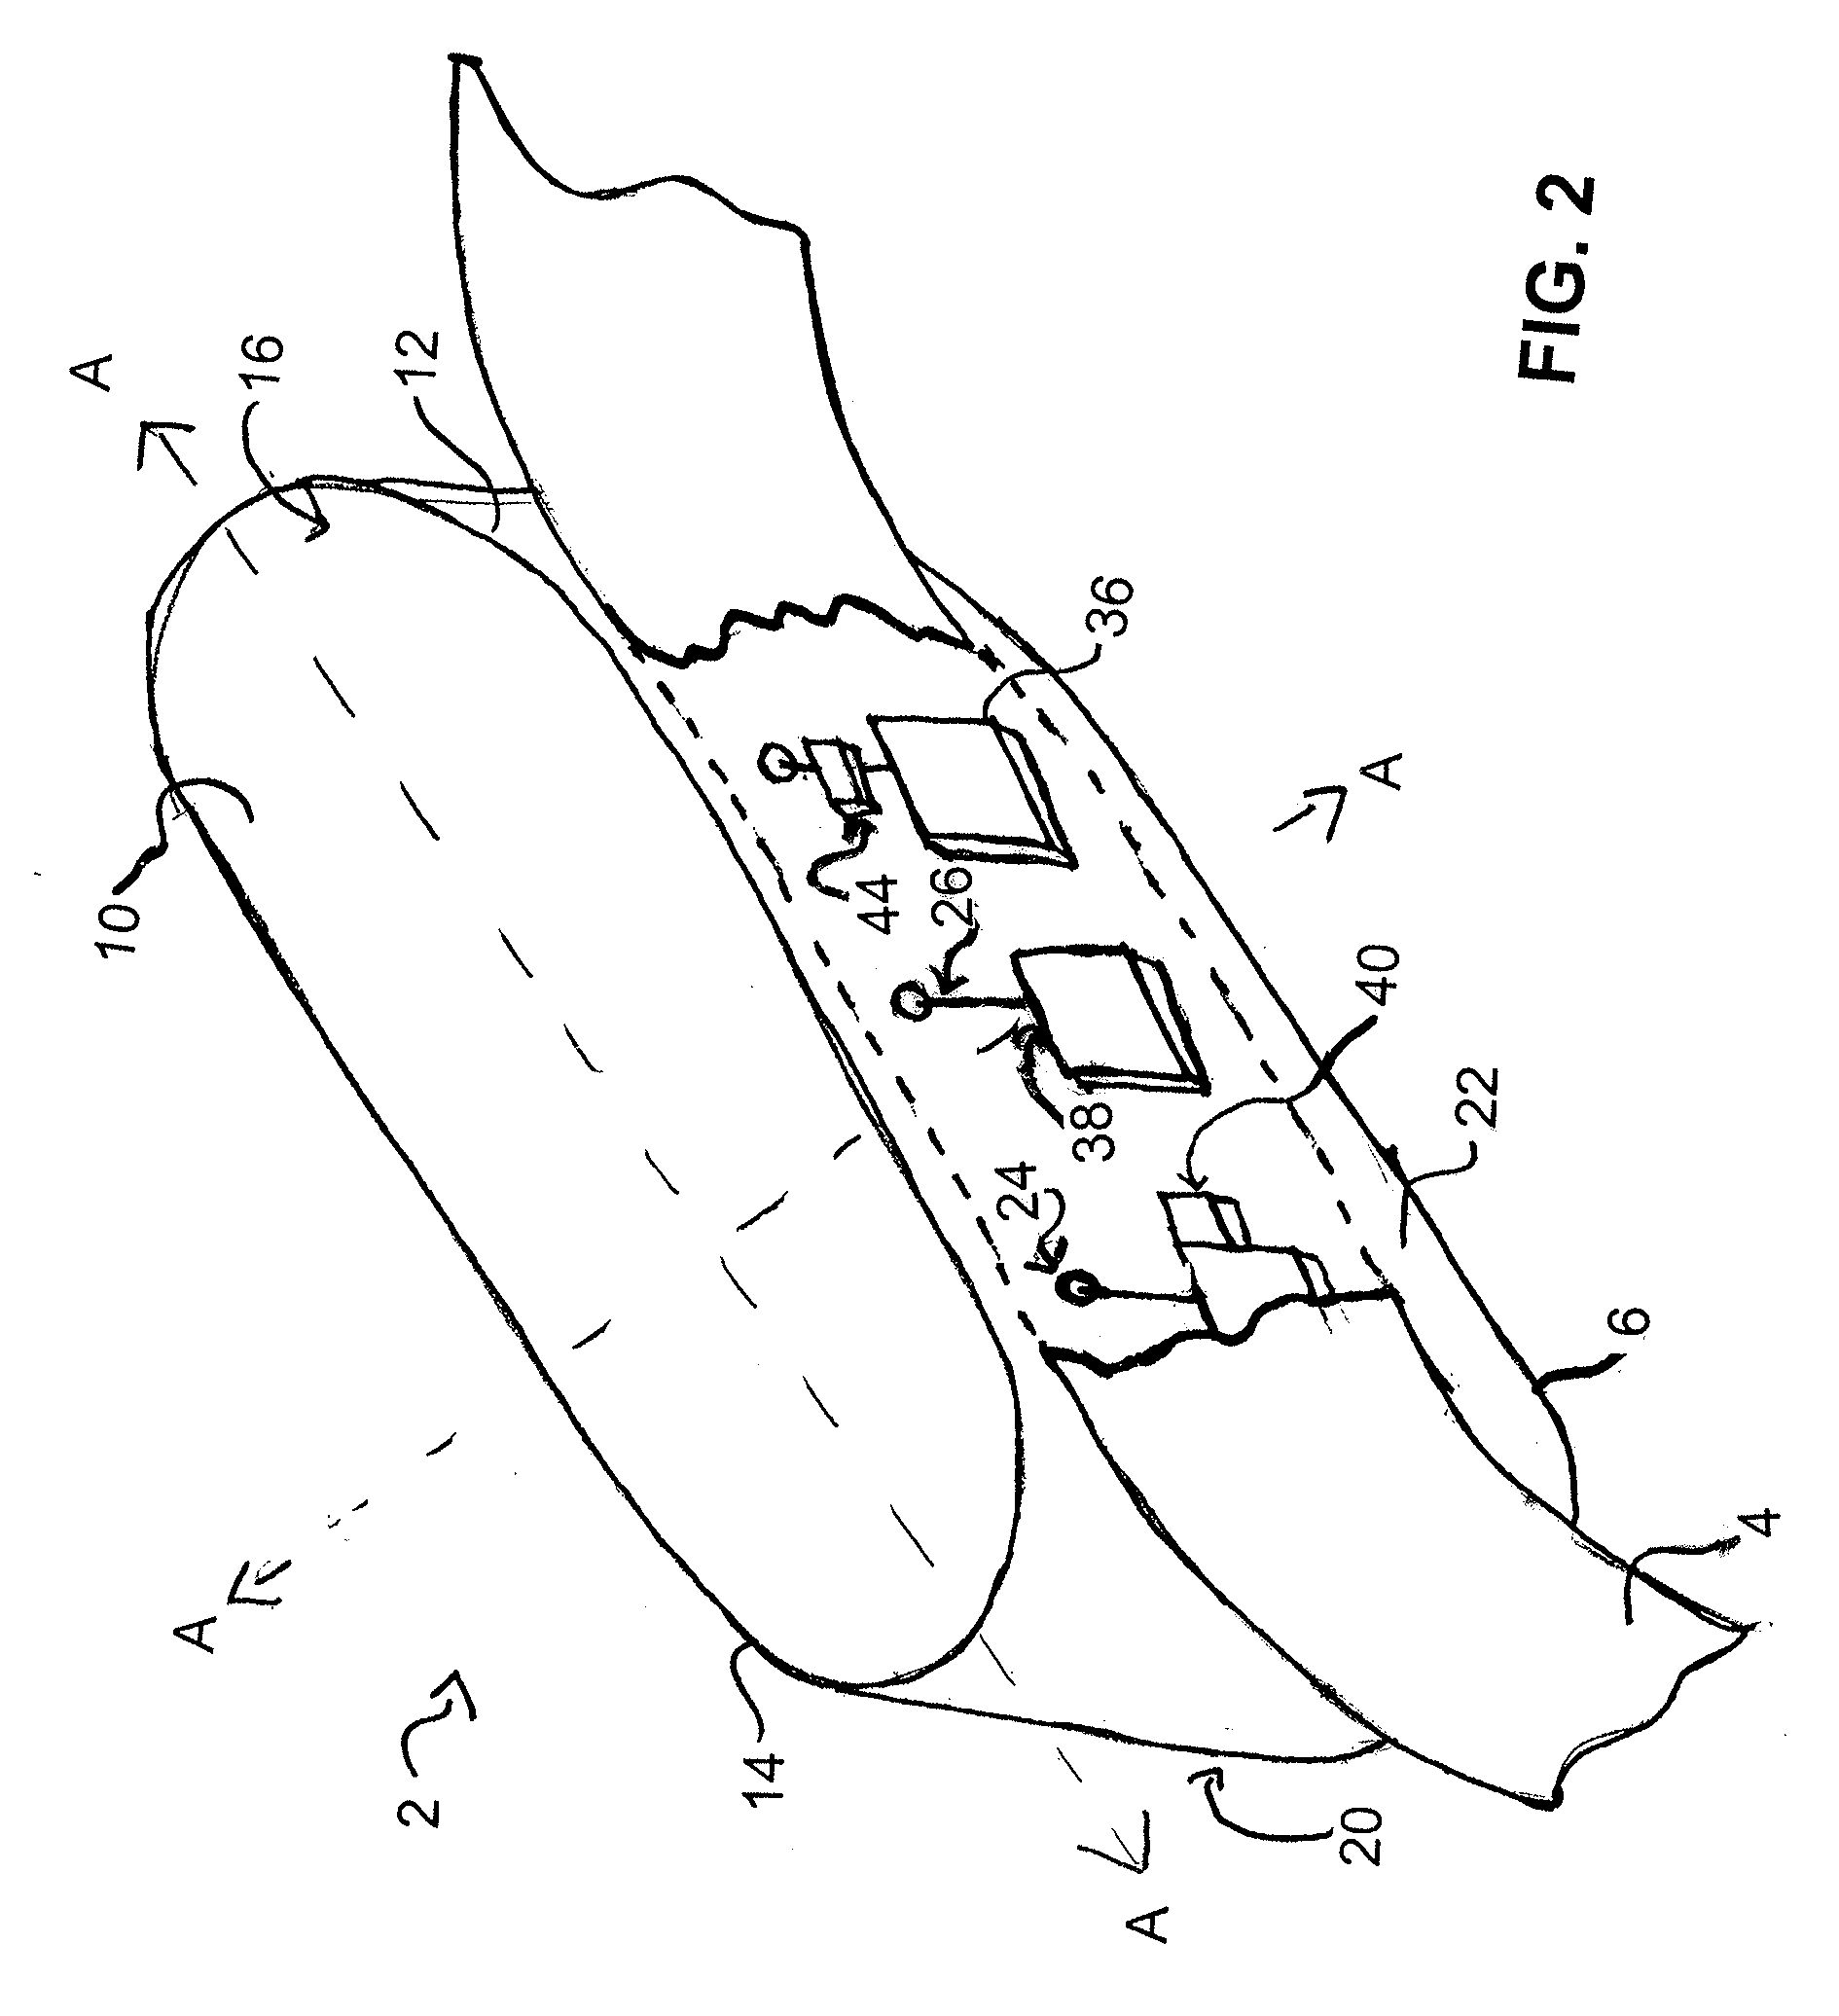 Tool belt with integrated tool retraction mechanism